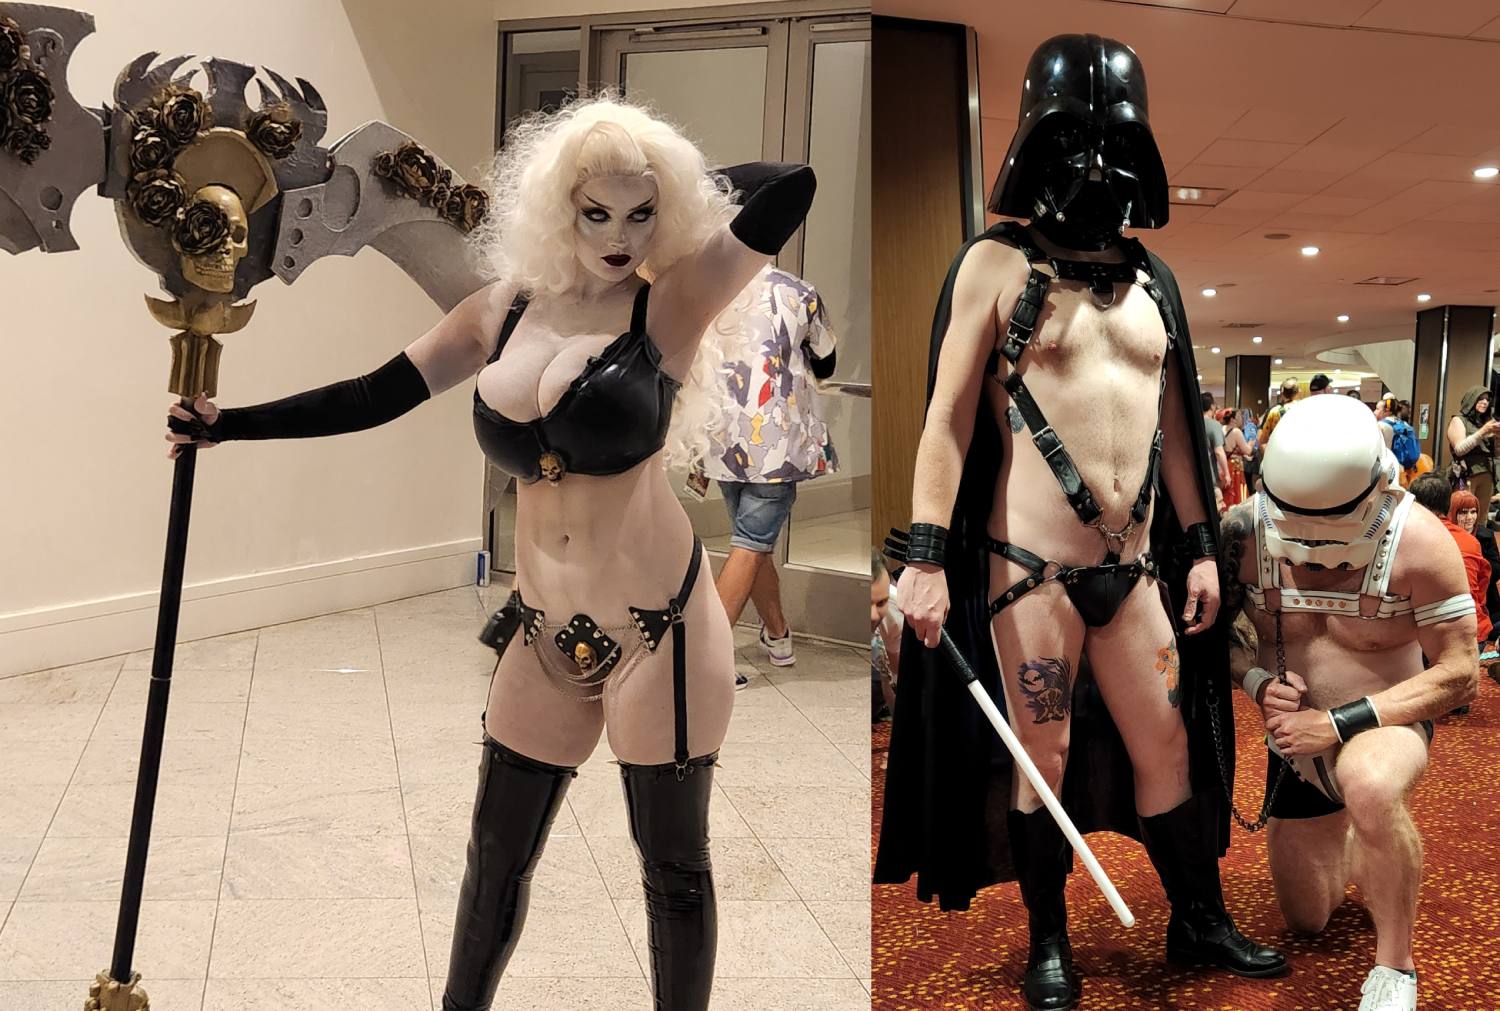 Big Tits At Cosplay Convention - Nerdy & Dirty: The Sexual Escapades of Comic Book Conventions -  Philadelphia Weekly